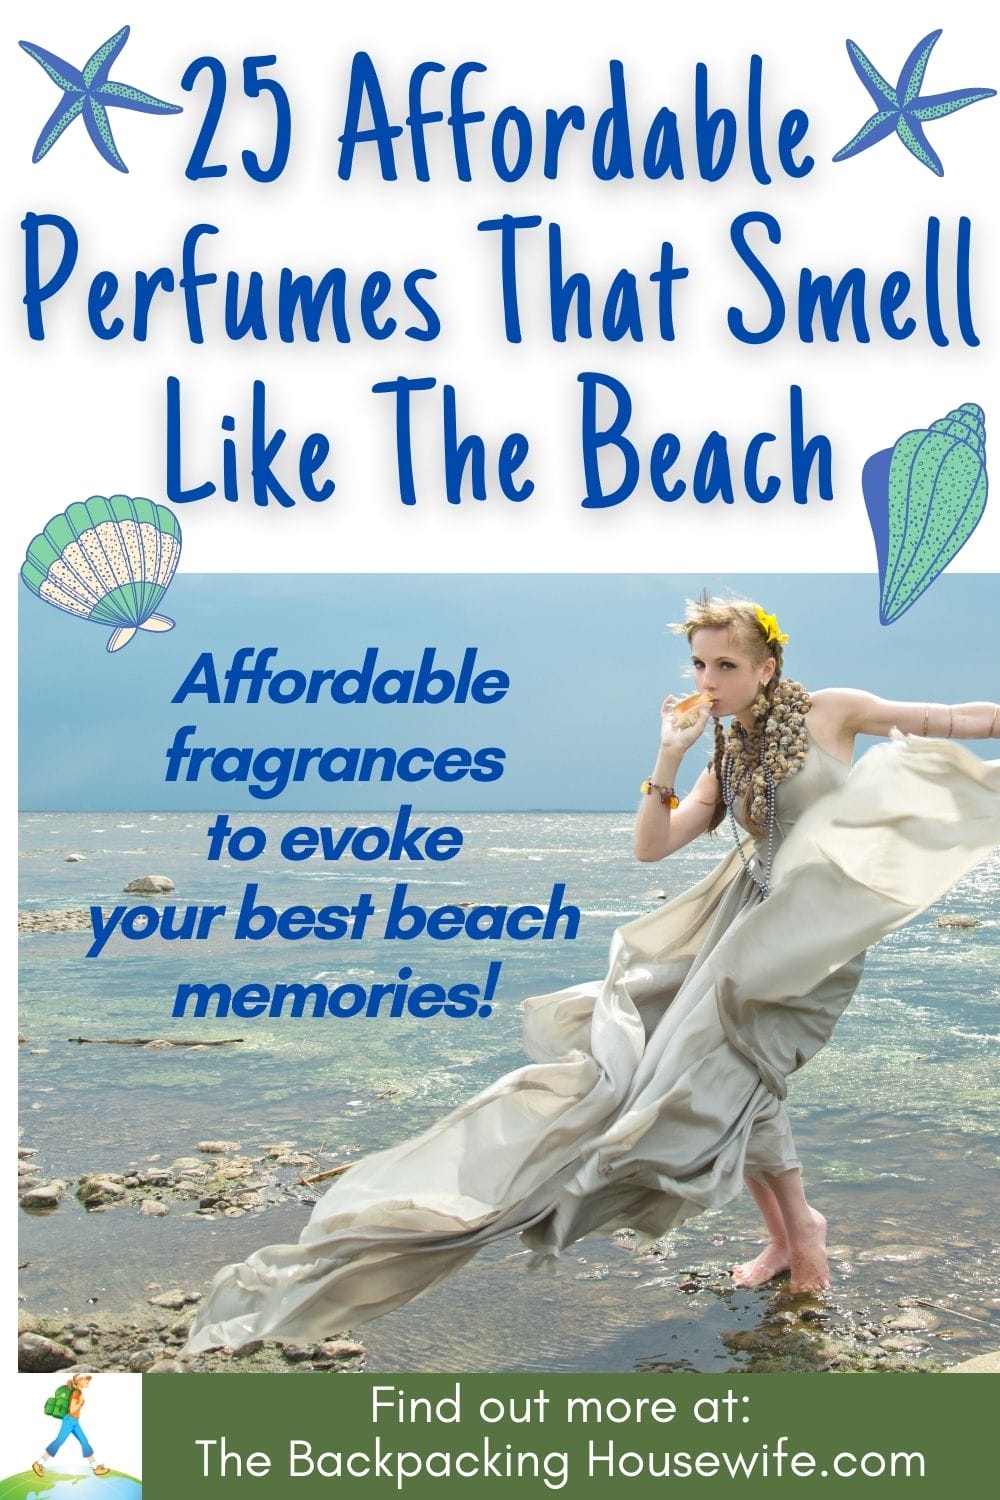 Pinterest Affordable fragrances that smell like the beach